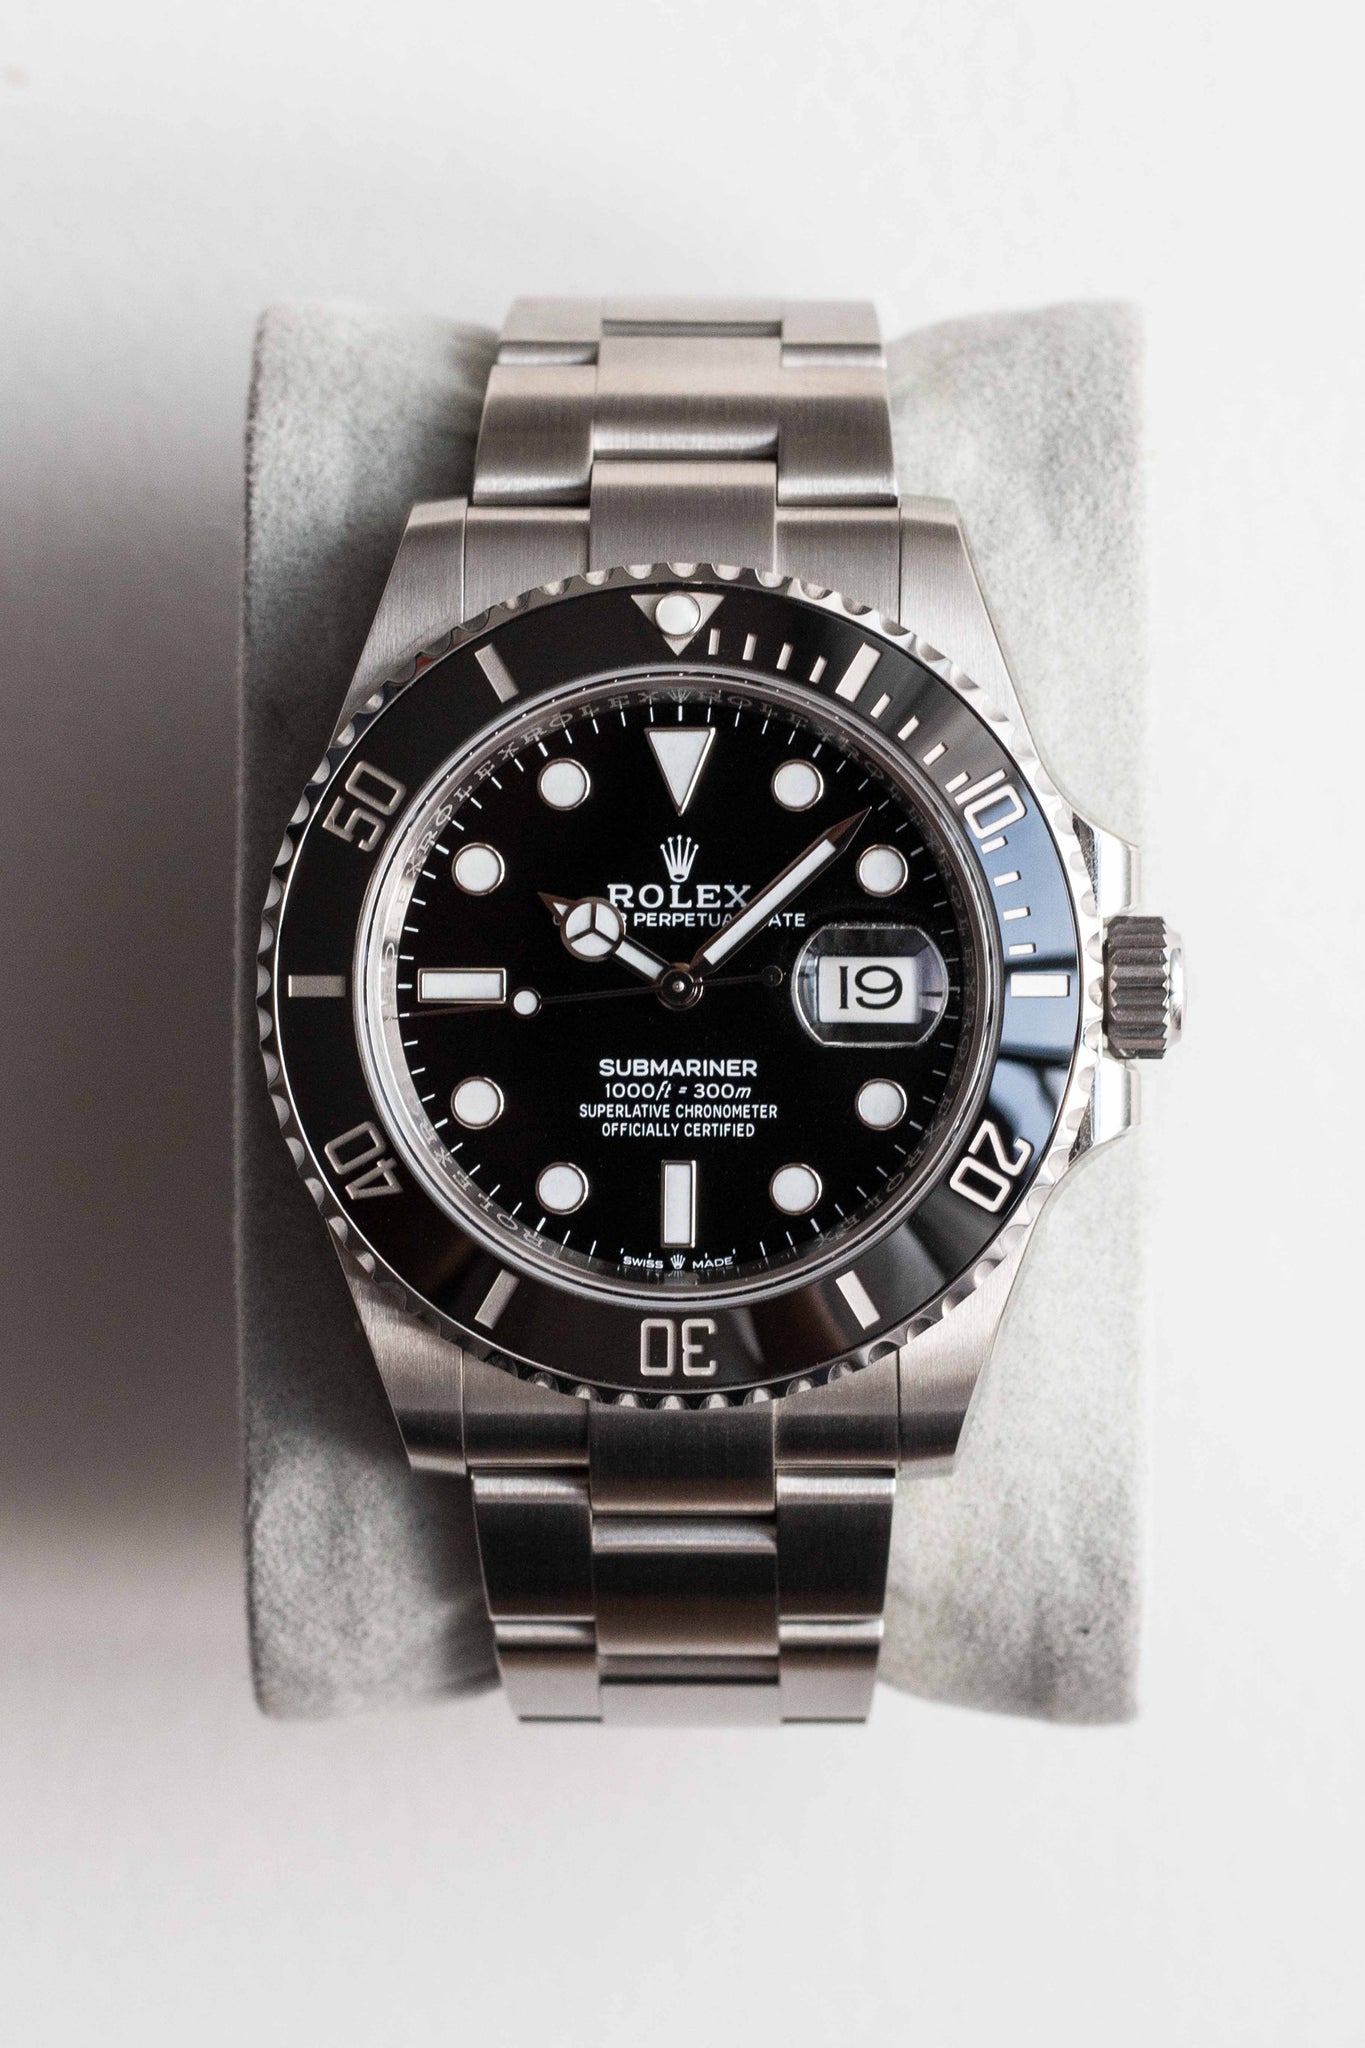 Rolex Submariner Ref. 126610LN Date 2021 w/ Box & Papers